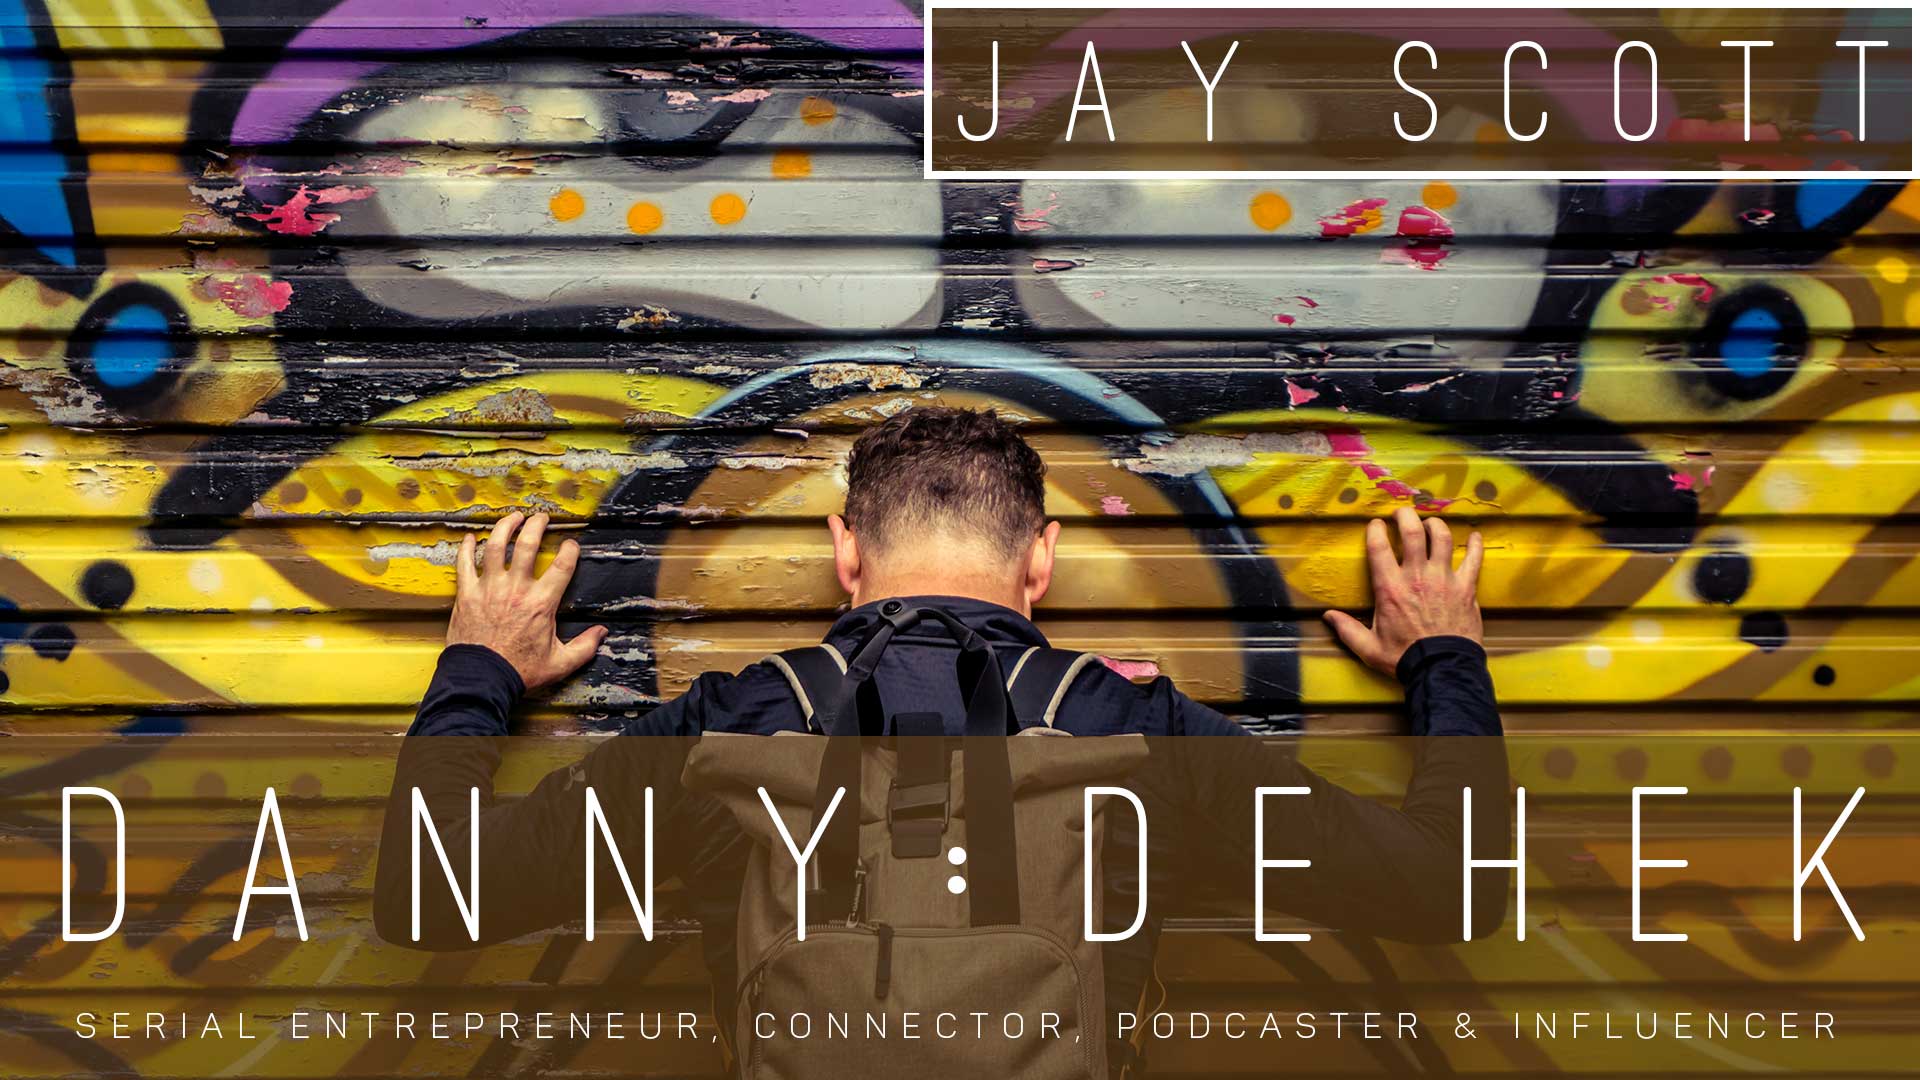 WHAT DE HEK Podcast 12 Questions with Jay Scott Jay the Comedian Entrepreneur Decision Maker Connector Podcaster Educator